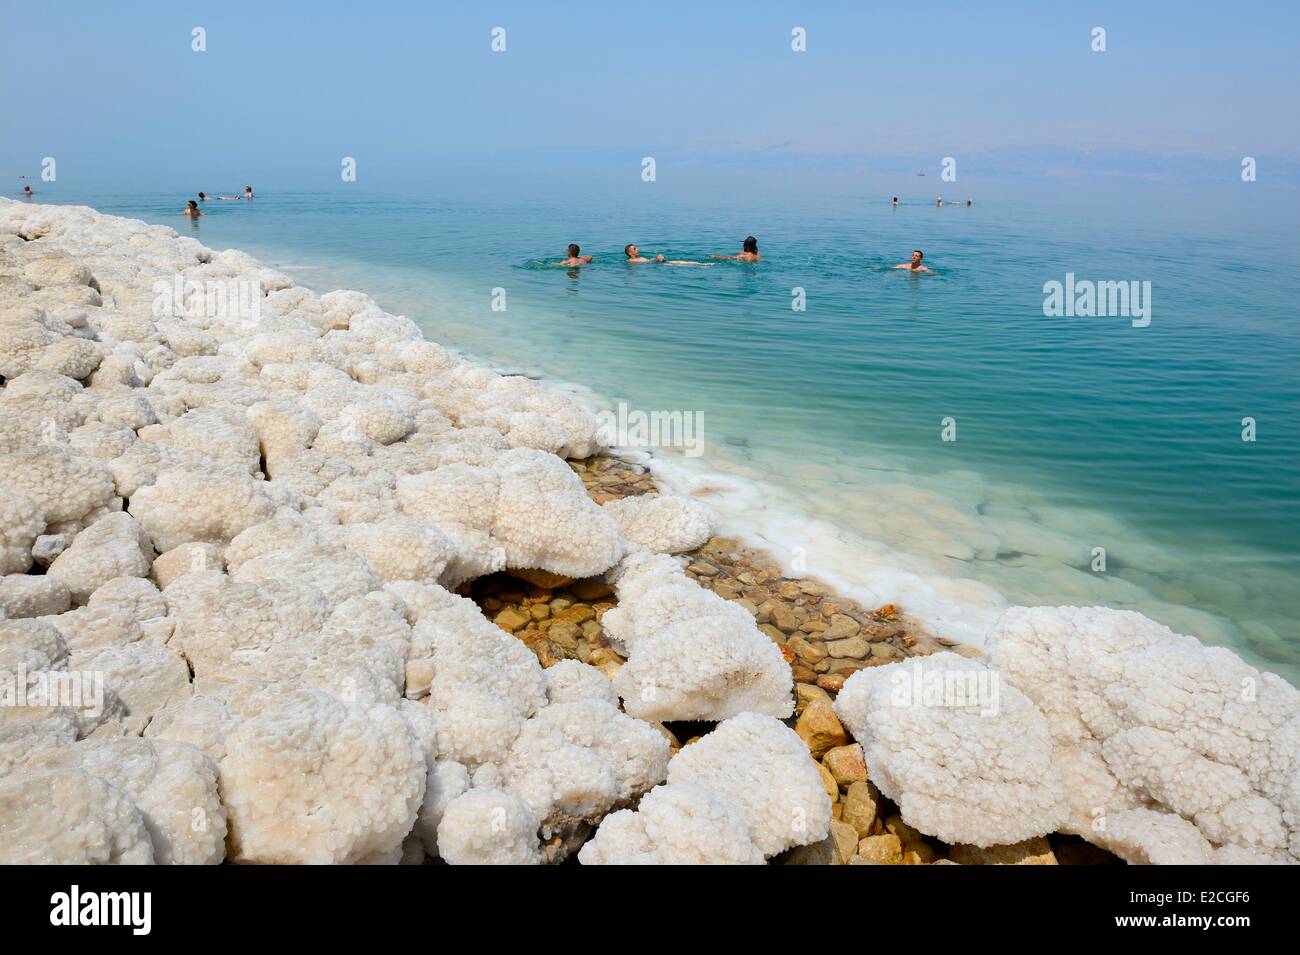 Israel, Southern district, swimmers at Ein Gedi Beach on the Dead Sea, saline concretions Stock Photo